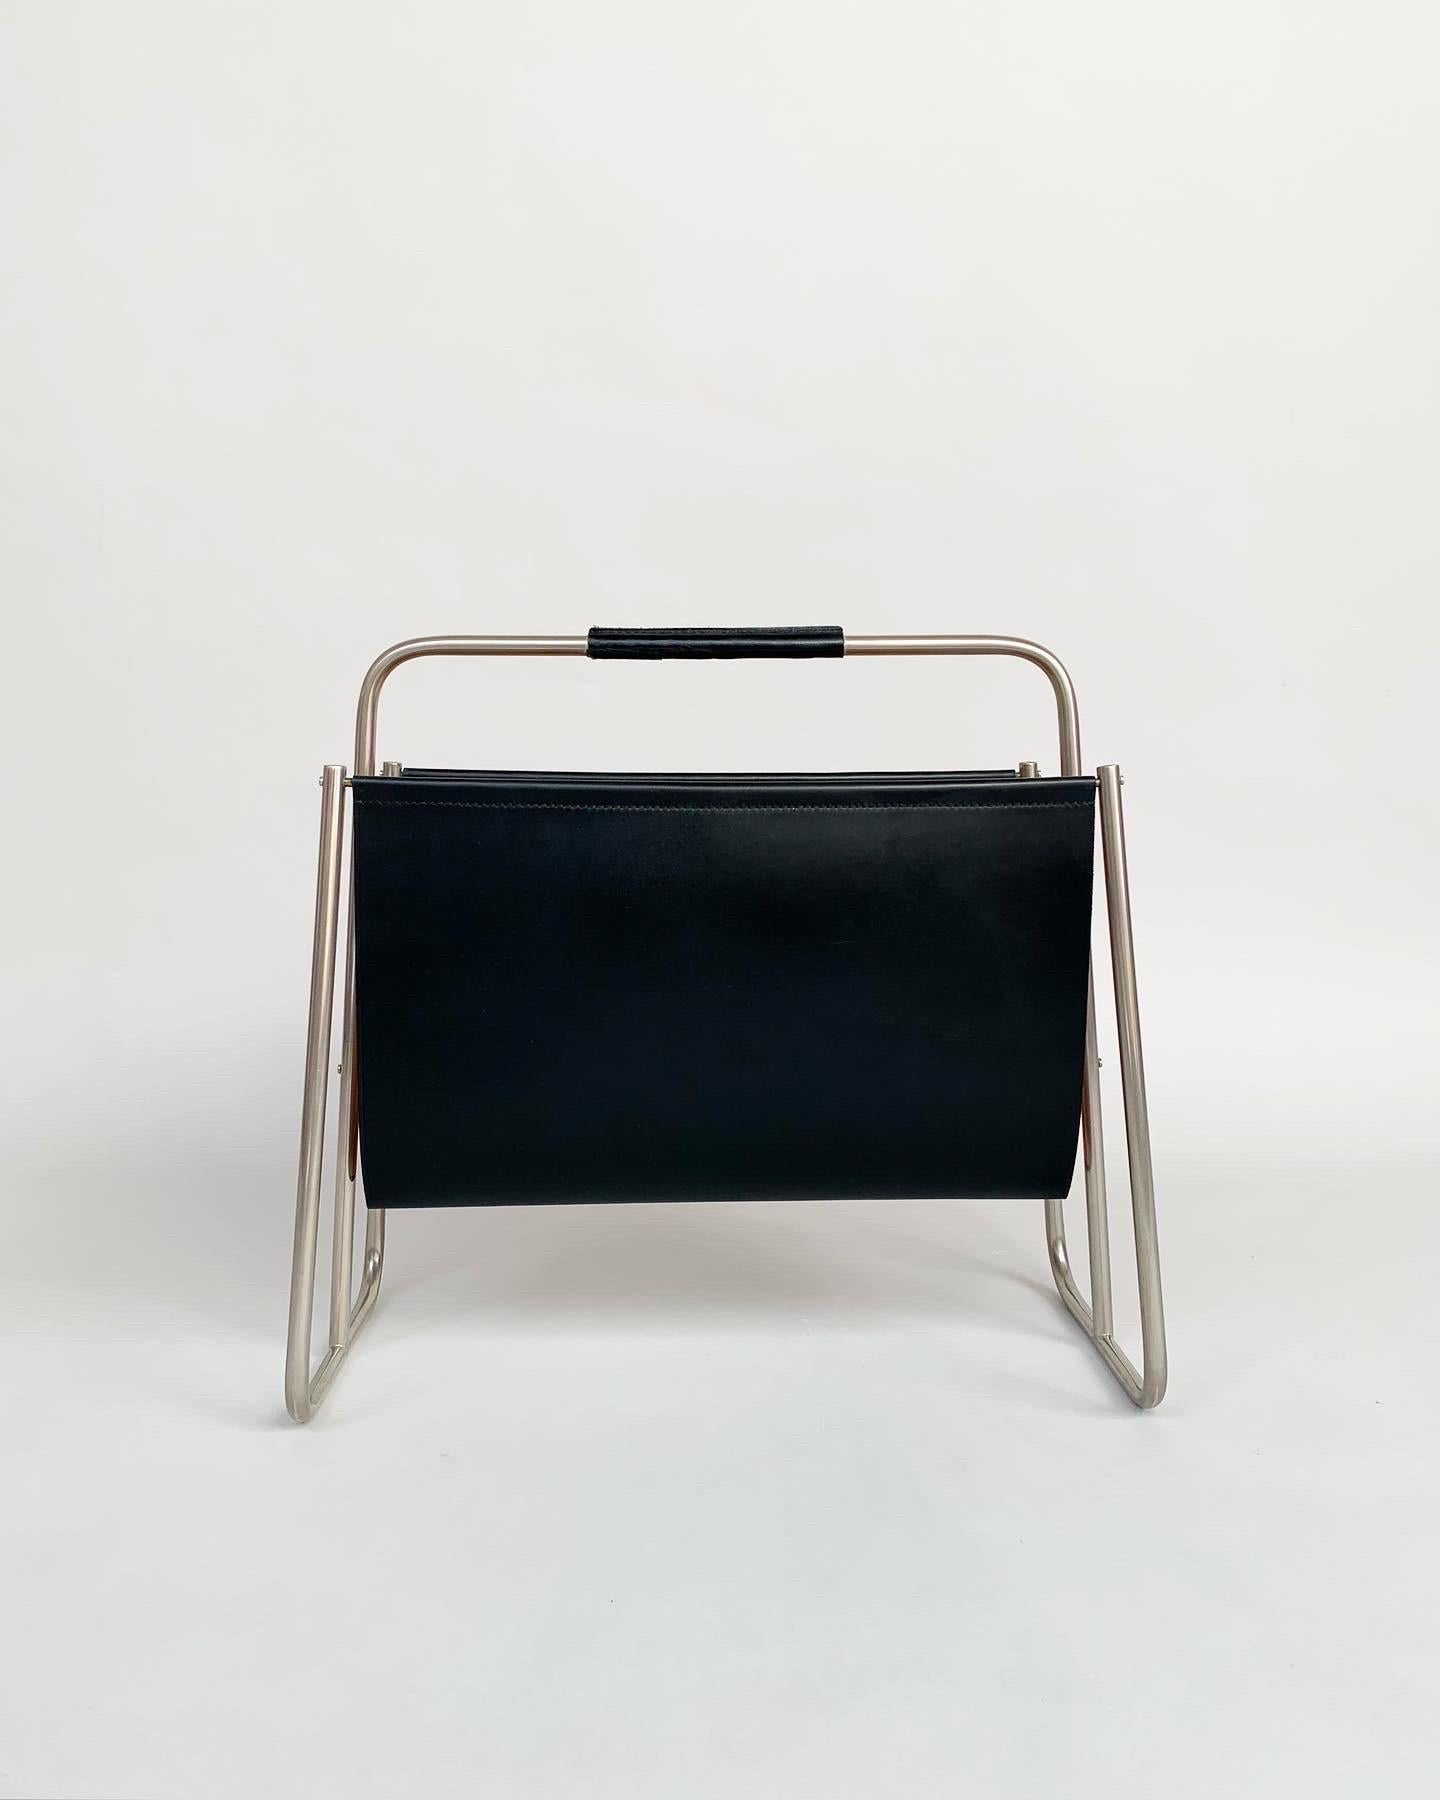 Carl Auböck magazine rack with a nickel plated frame and black leather, hand crafted by the Auböck workshop in Vienna, Austria in the 1950s.

Solid, hand-shaped with stitched leather. The leather is still very soft and unused, only a slightly